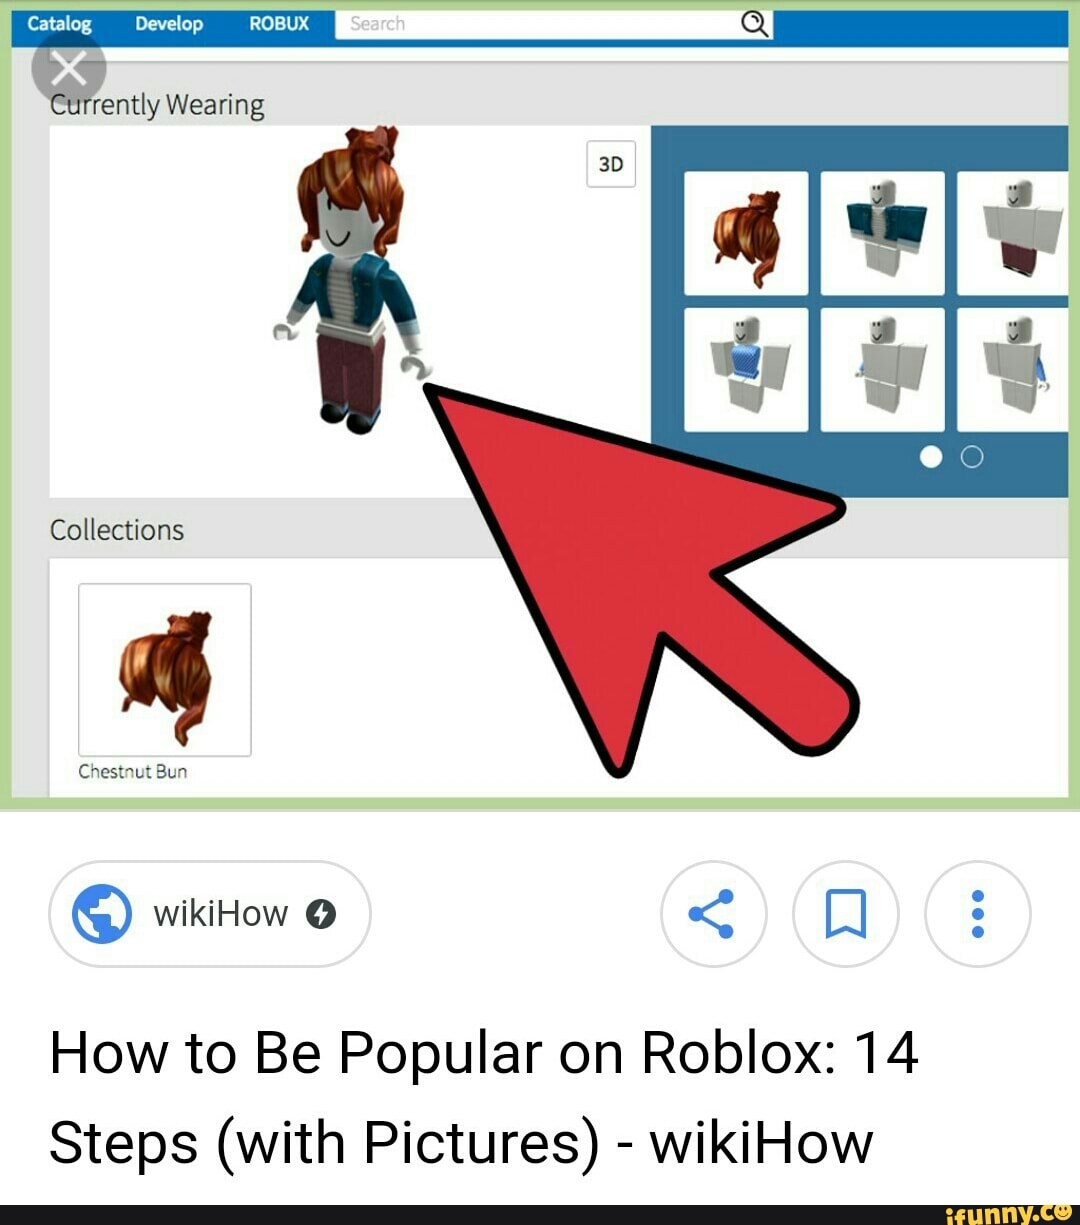 How To Be Popular On Roblox 14 Steps With Pictures Wikihow Ifunny - how to contact roblox wikihow